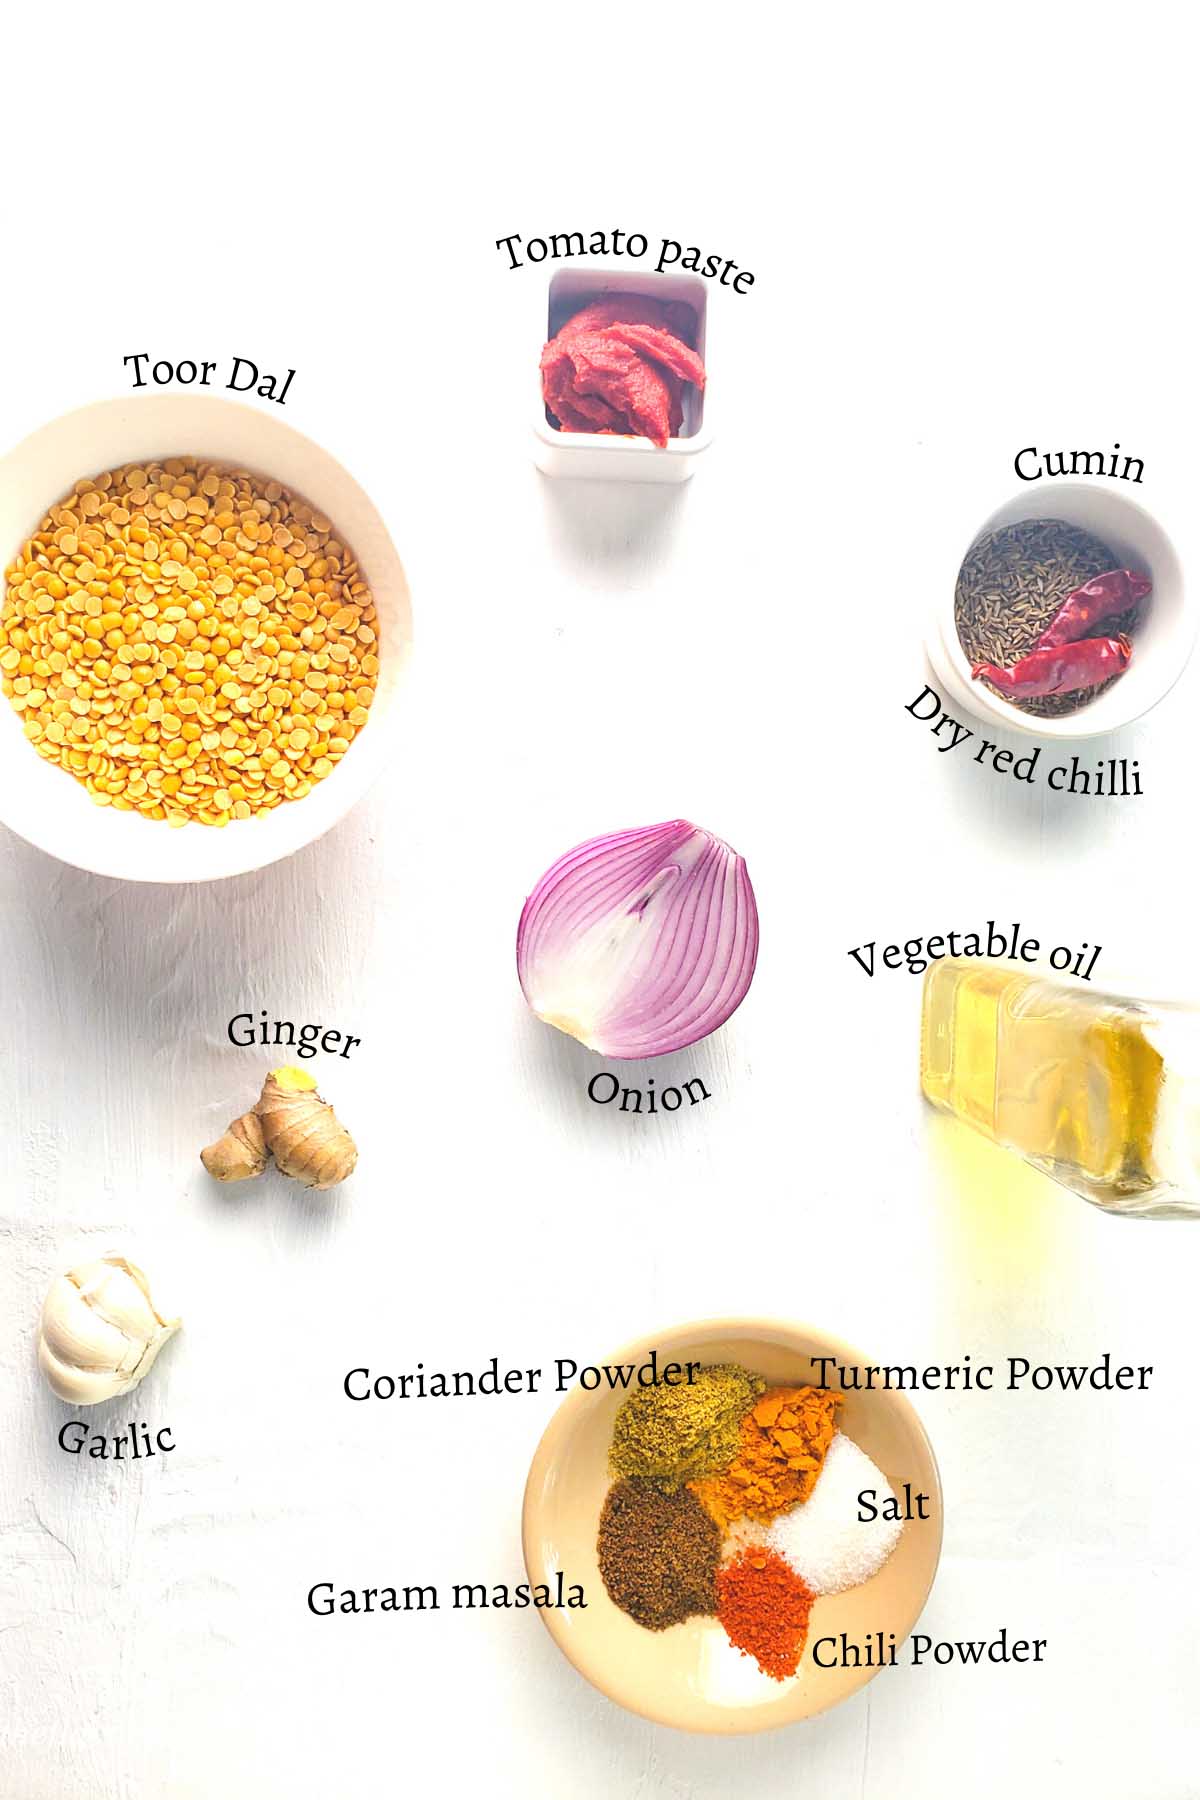 image showing all the ingredients